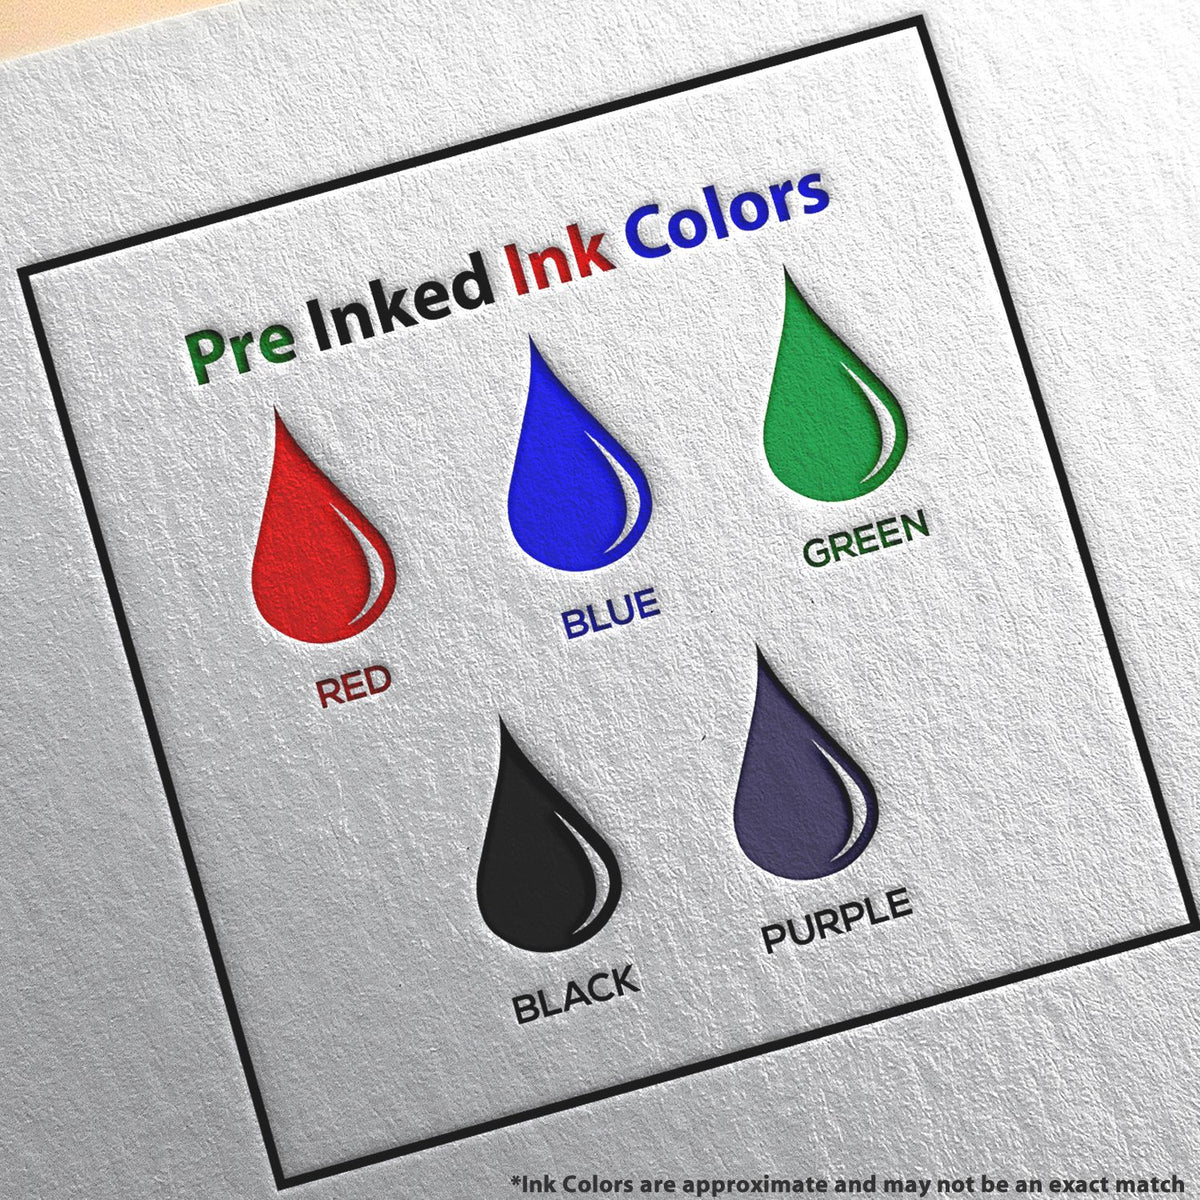 A picture showing the different ink colors or hues available for the Super Slim Montana Notary Public Stamp product.